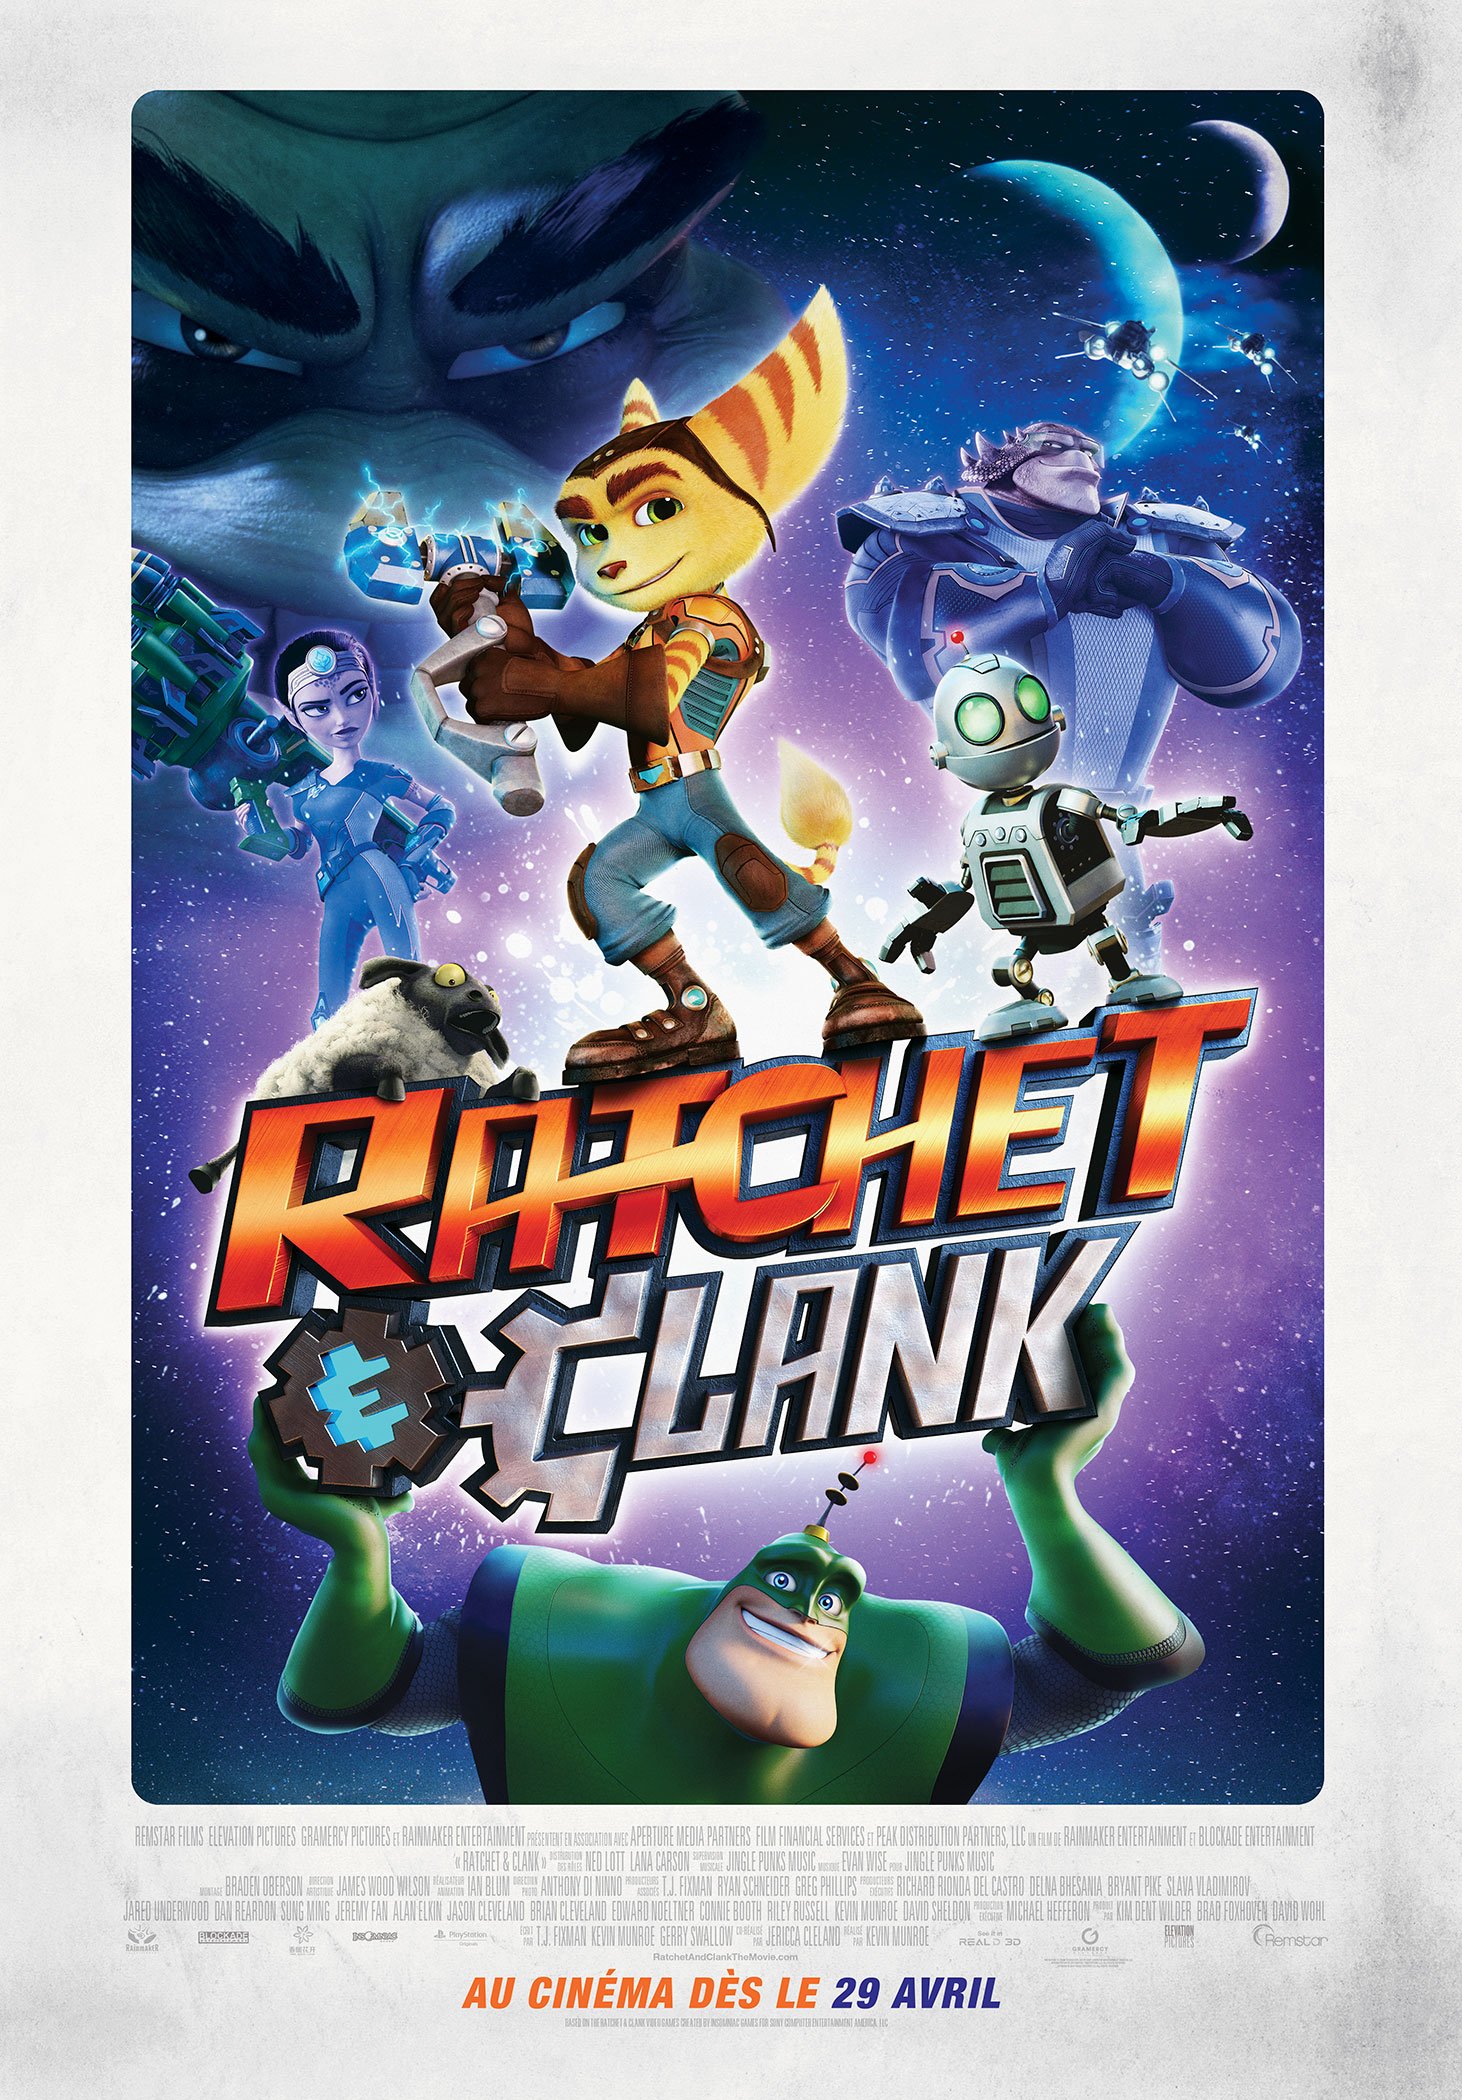 Poster of the movie Ratchet et Clank v.f.